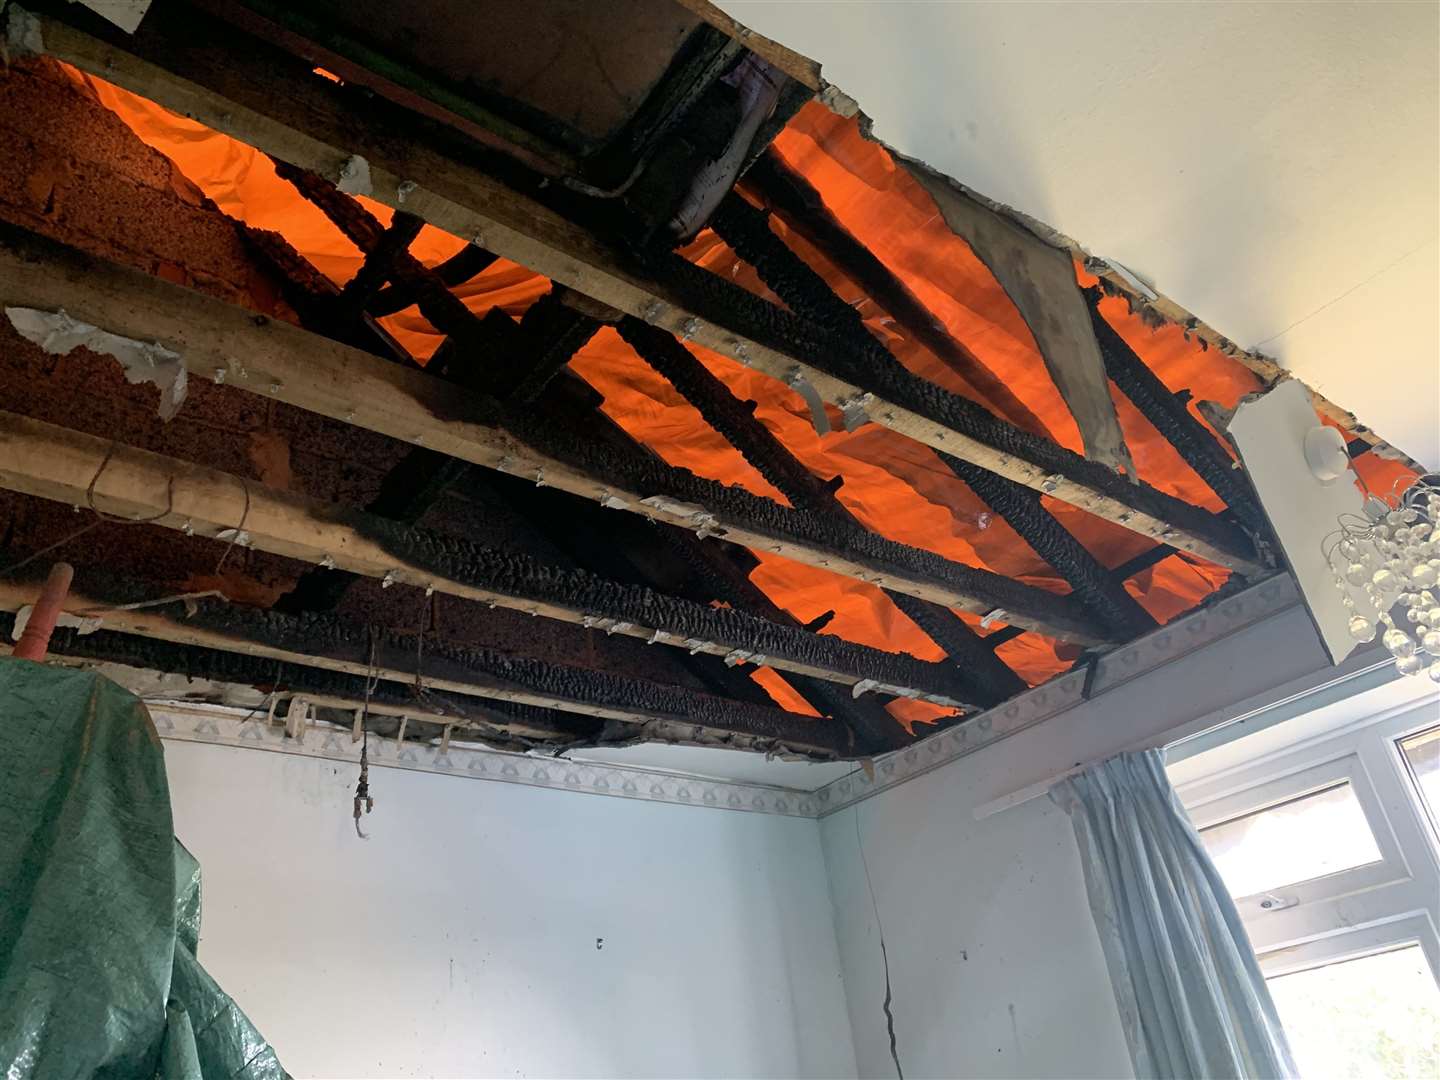 The hole in the roof of an upstairs bedroom caused by the lightning strike